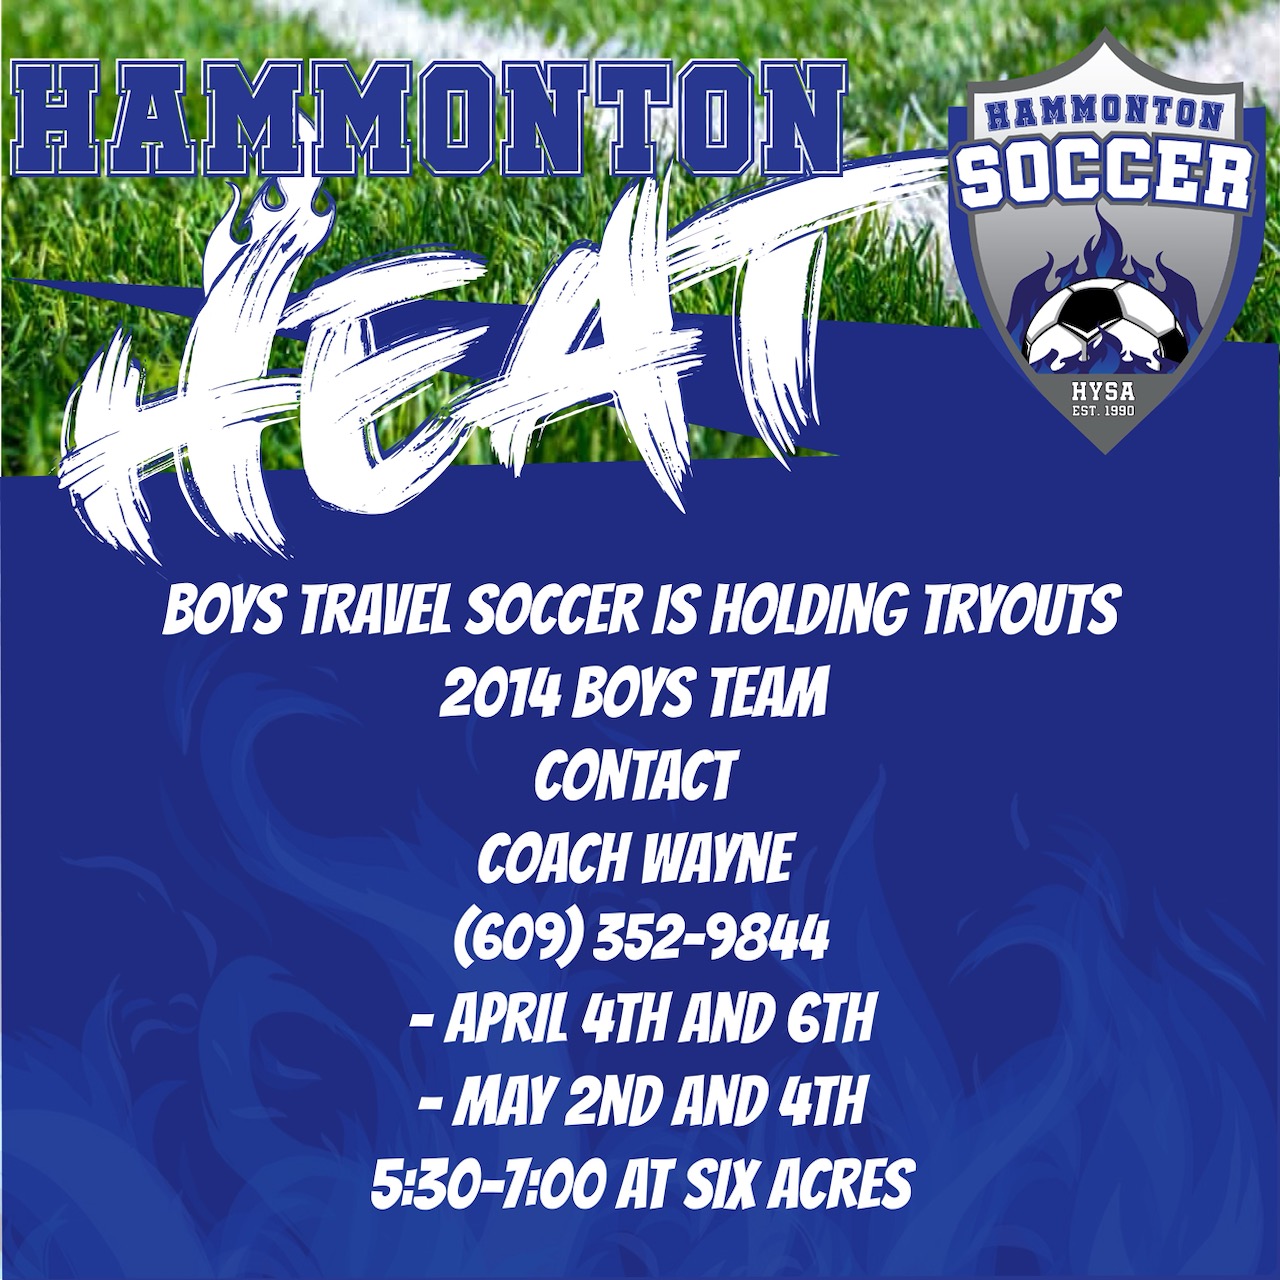 2014 Boys Travel Soccer Tryouts